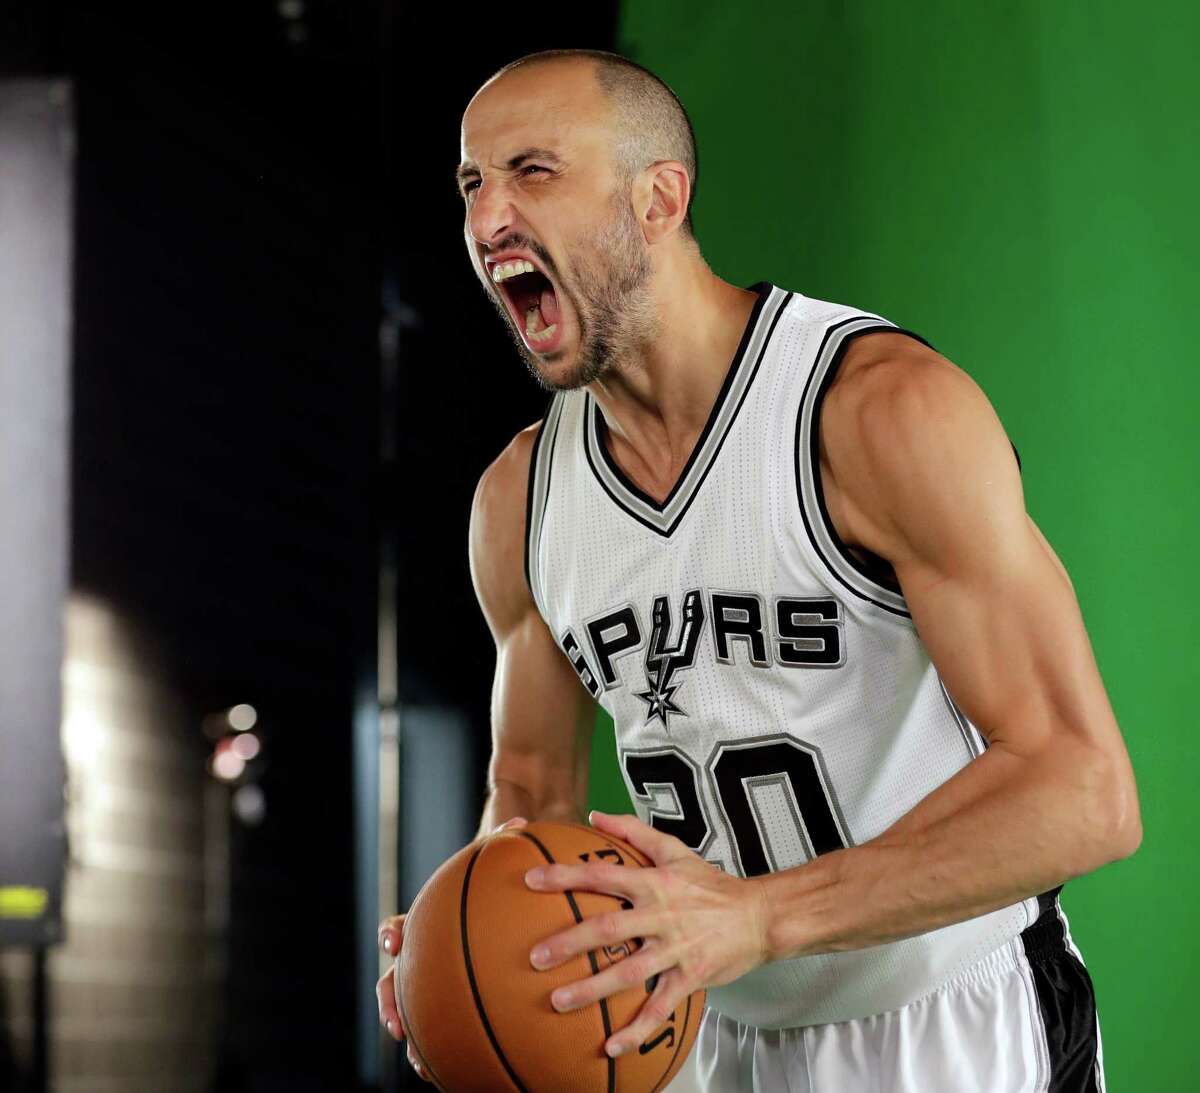 Spurs guard Manu Ginobili poses for photos during media day on Sept. 26, 2016, in San Antonio.